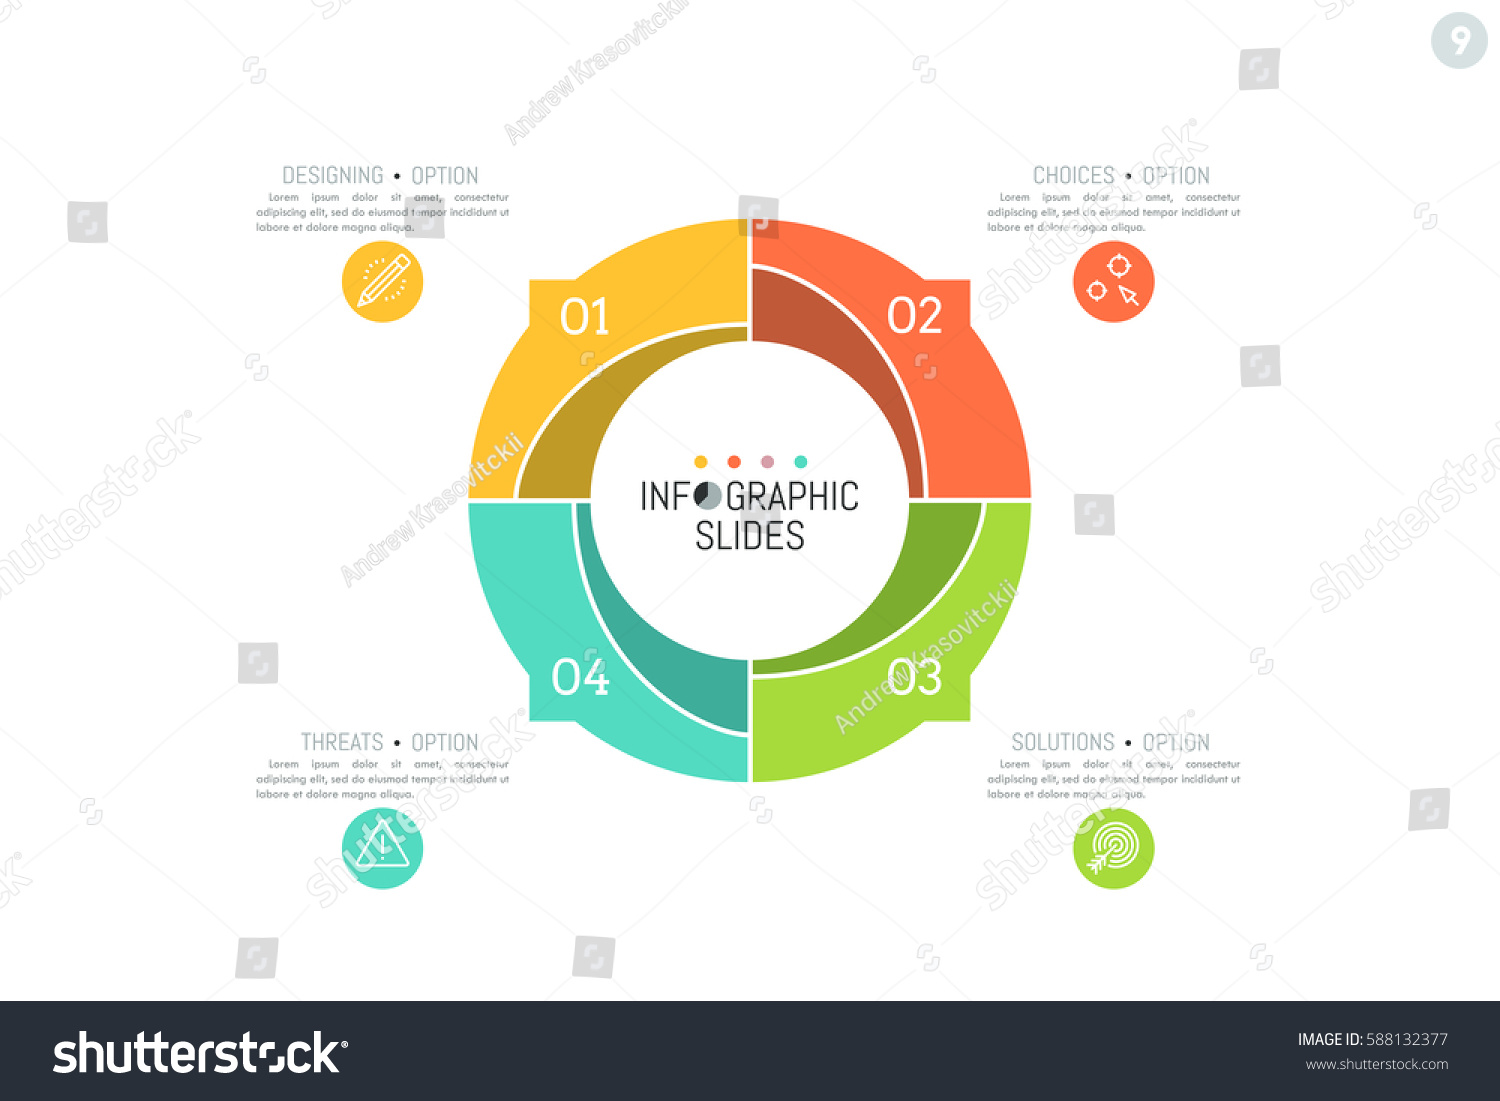 Infographic Design Layout Round Diagram Divided Stock